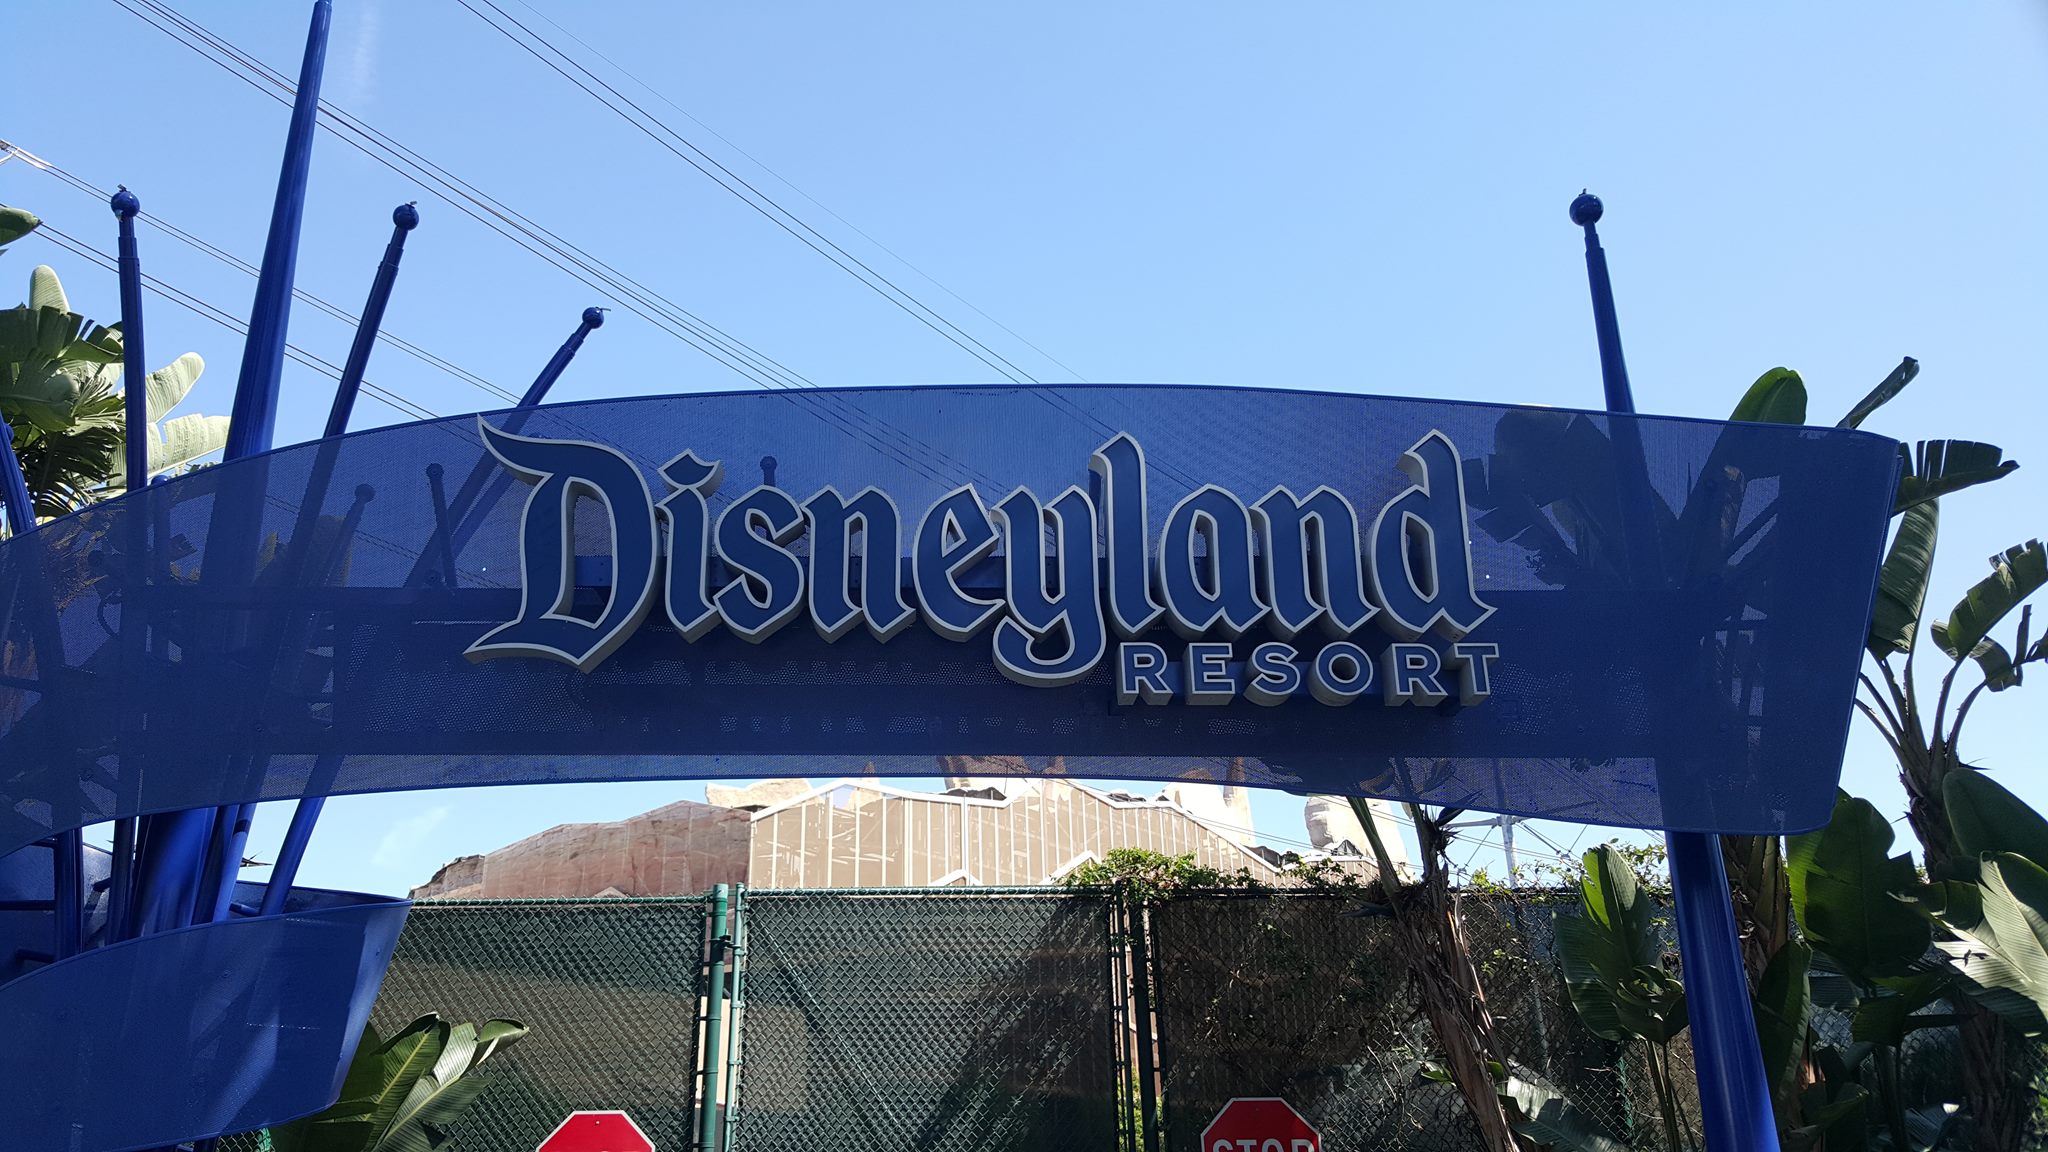 Can I Bring Outside Food or Drink Into Disneyland?